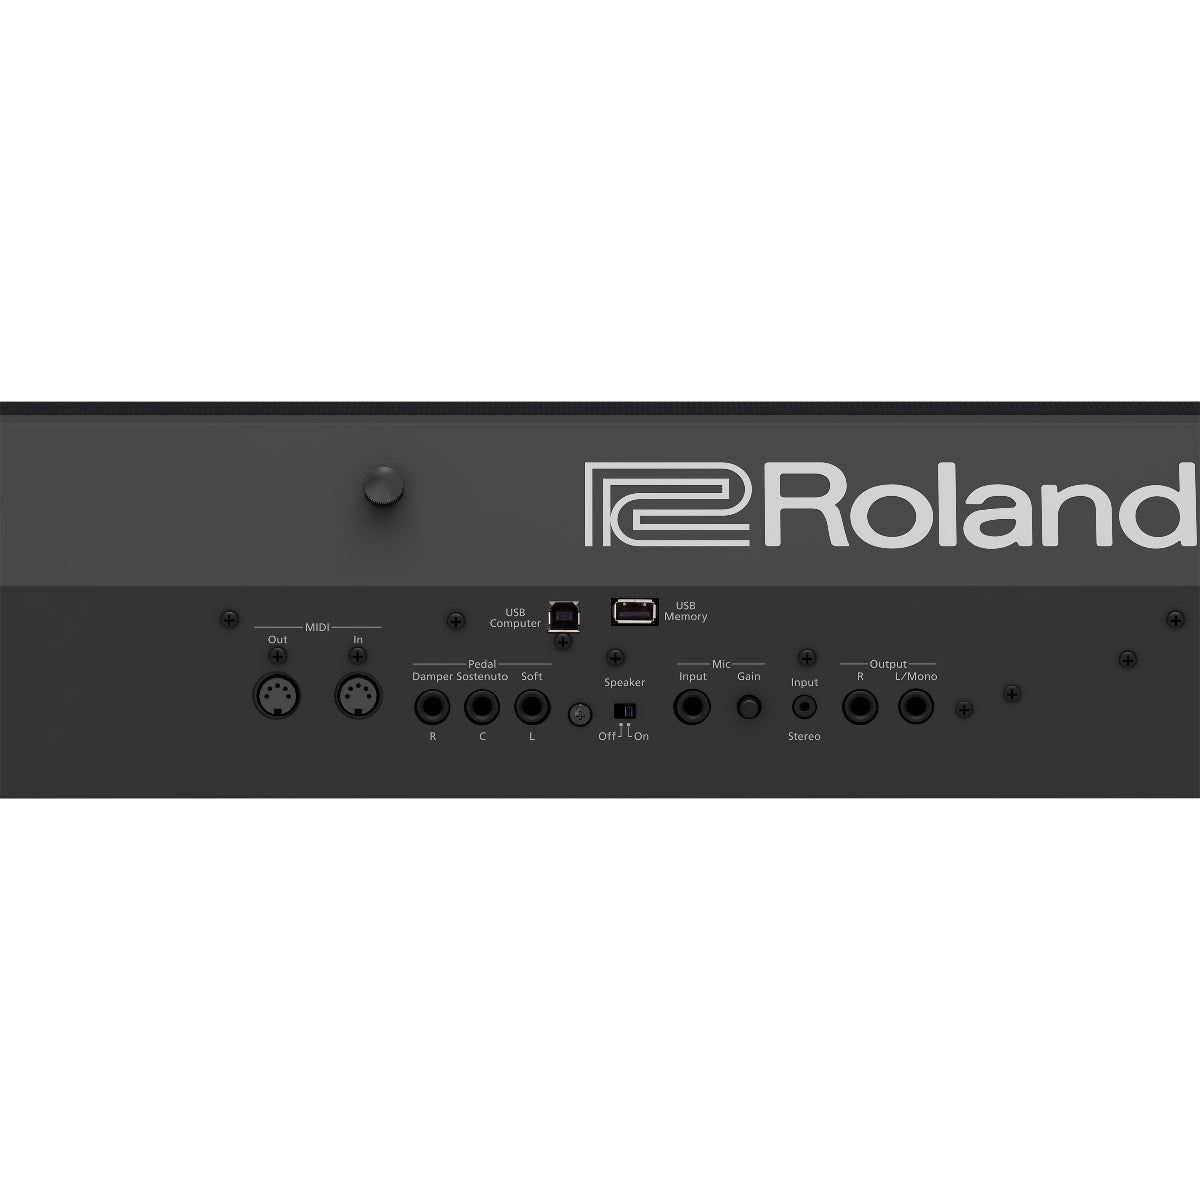 Close-up rear view of Roland FP-90X Digital Piano - Black showing audio and data conections